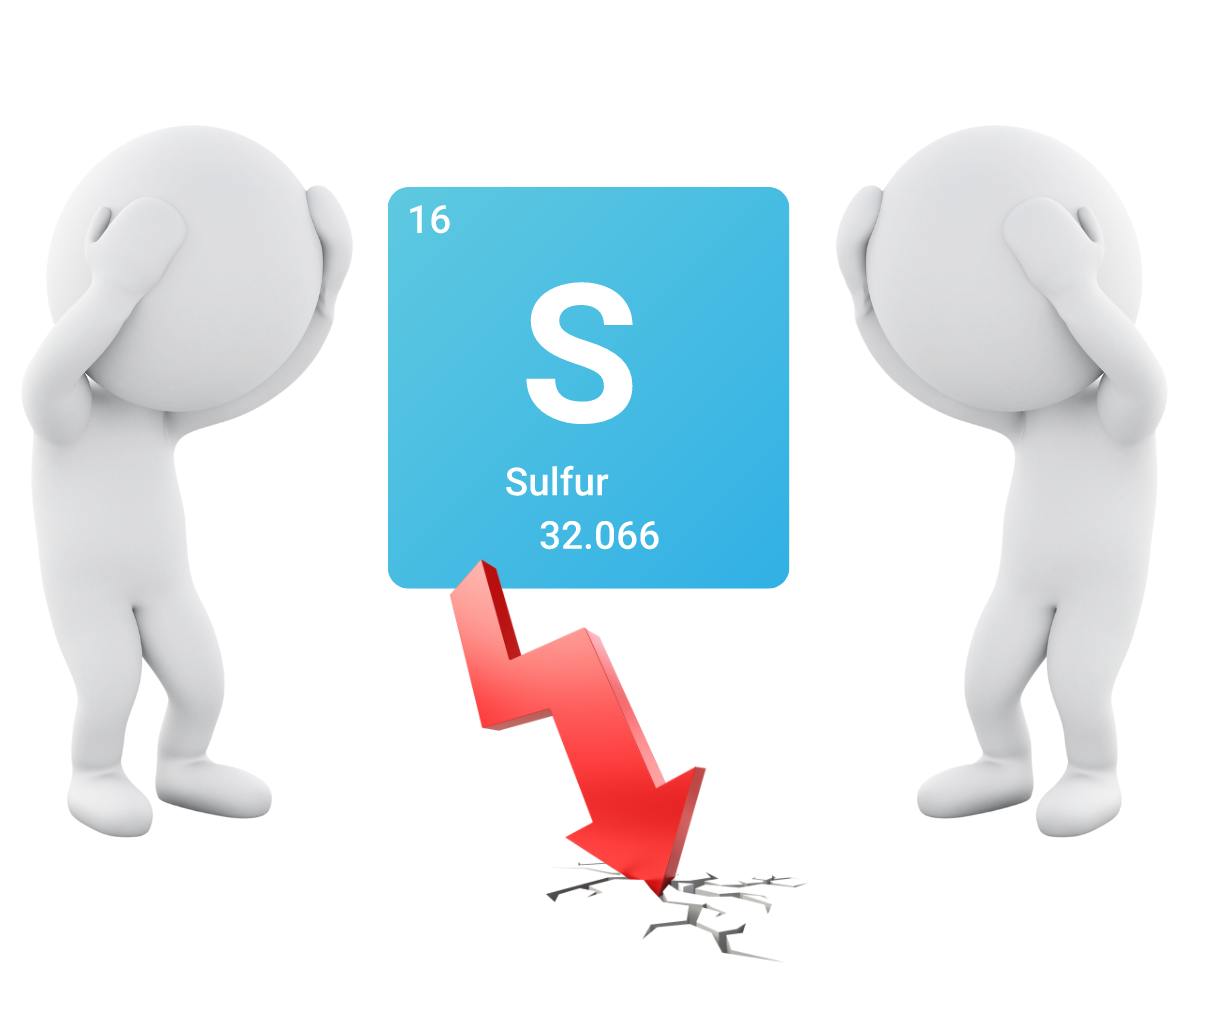 Sulfur deficiency can be very common